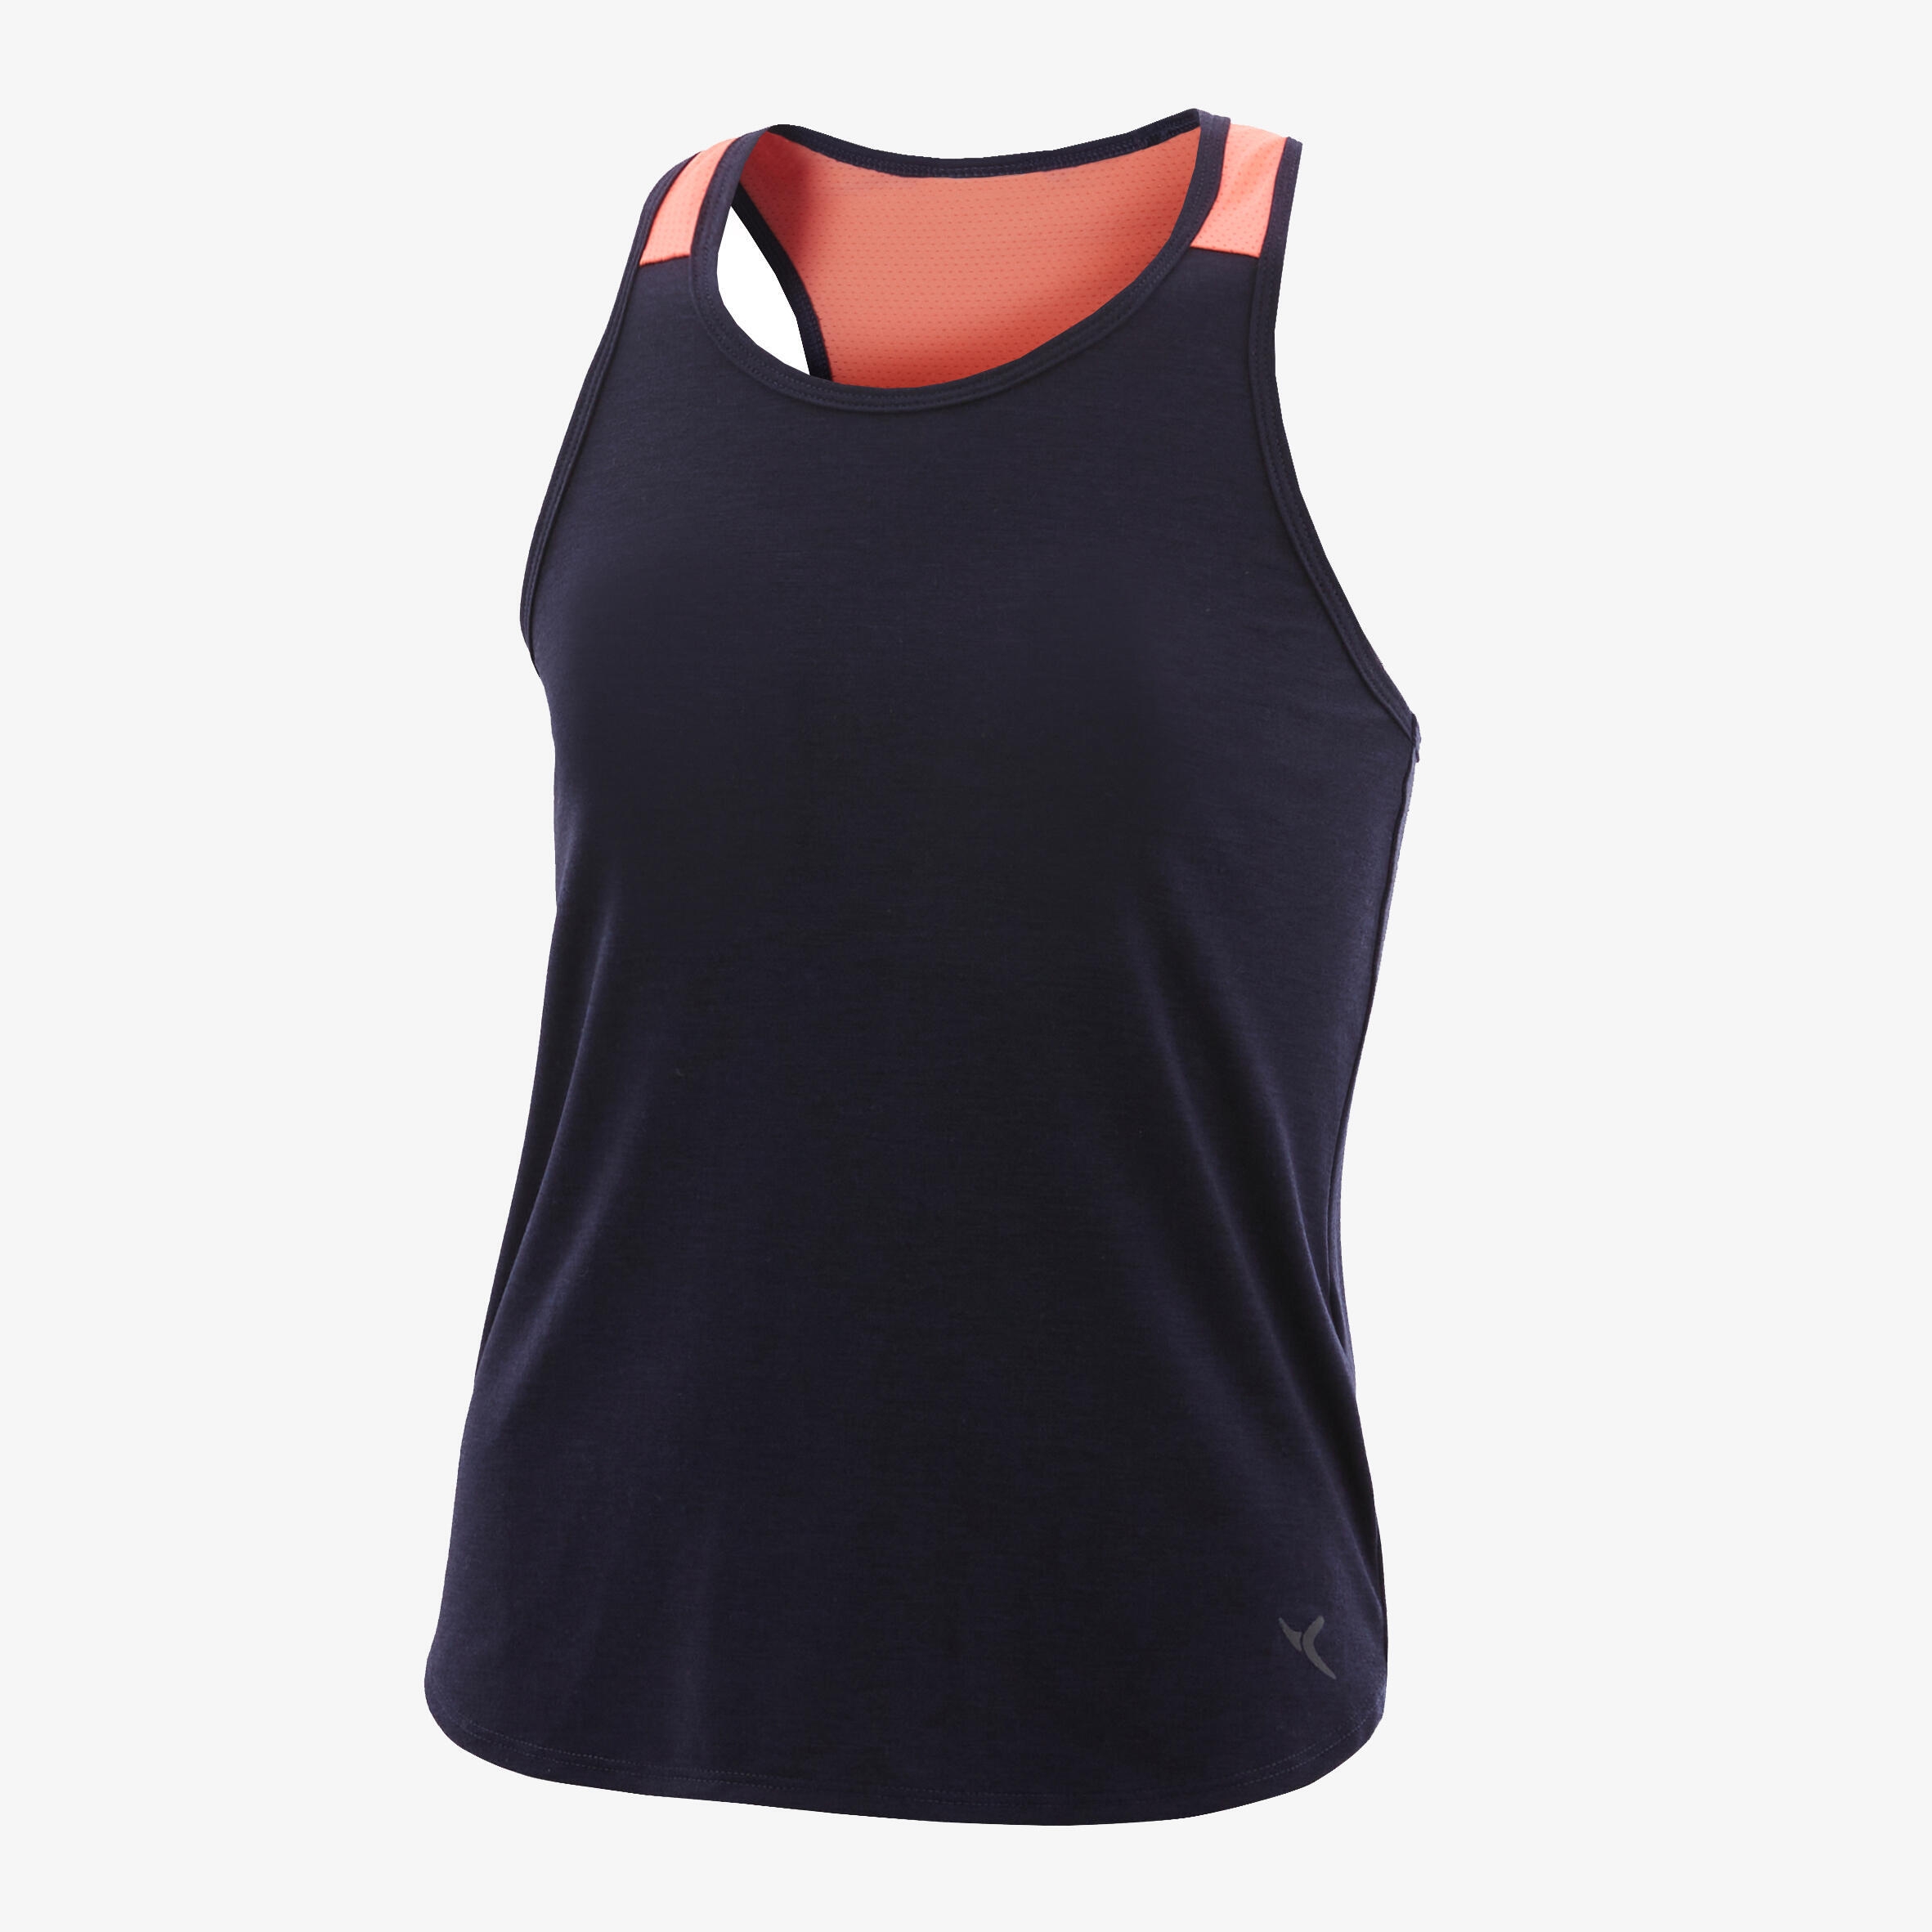 Girls' Breathable Tank Top - Navy Blue 2/5